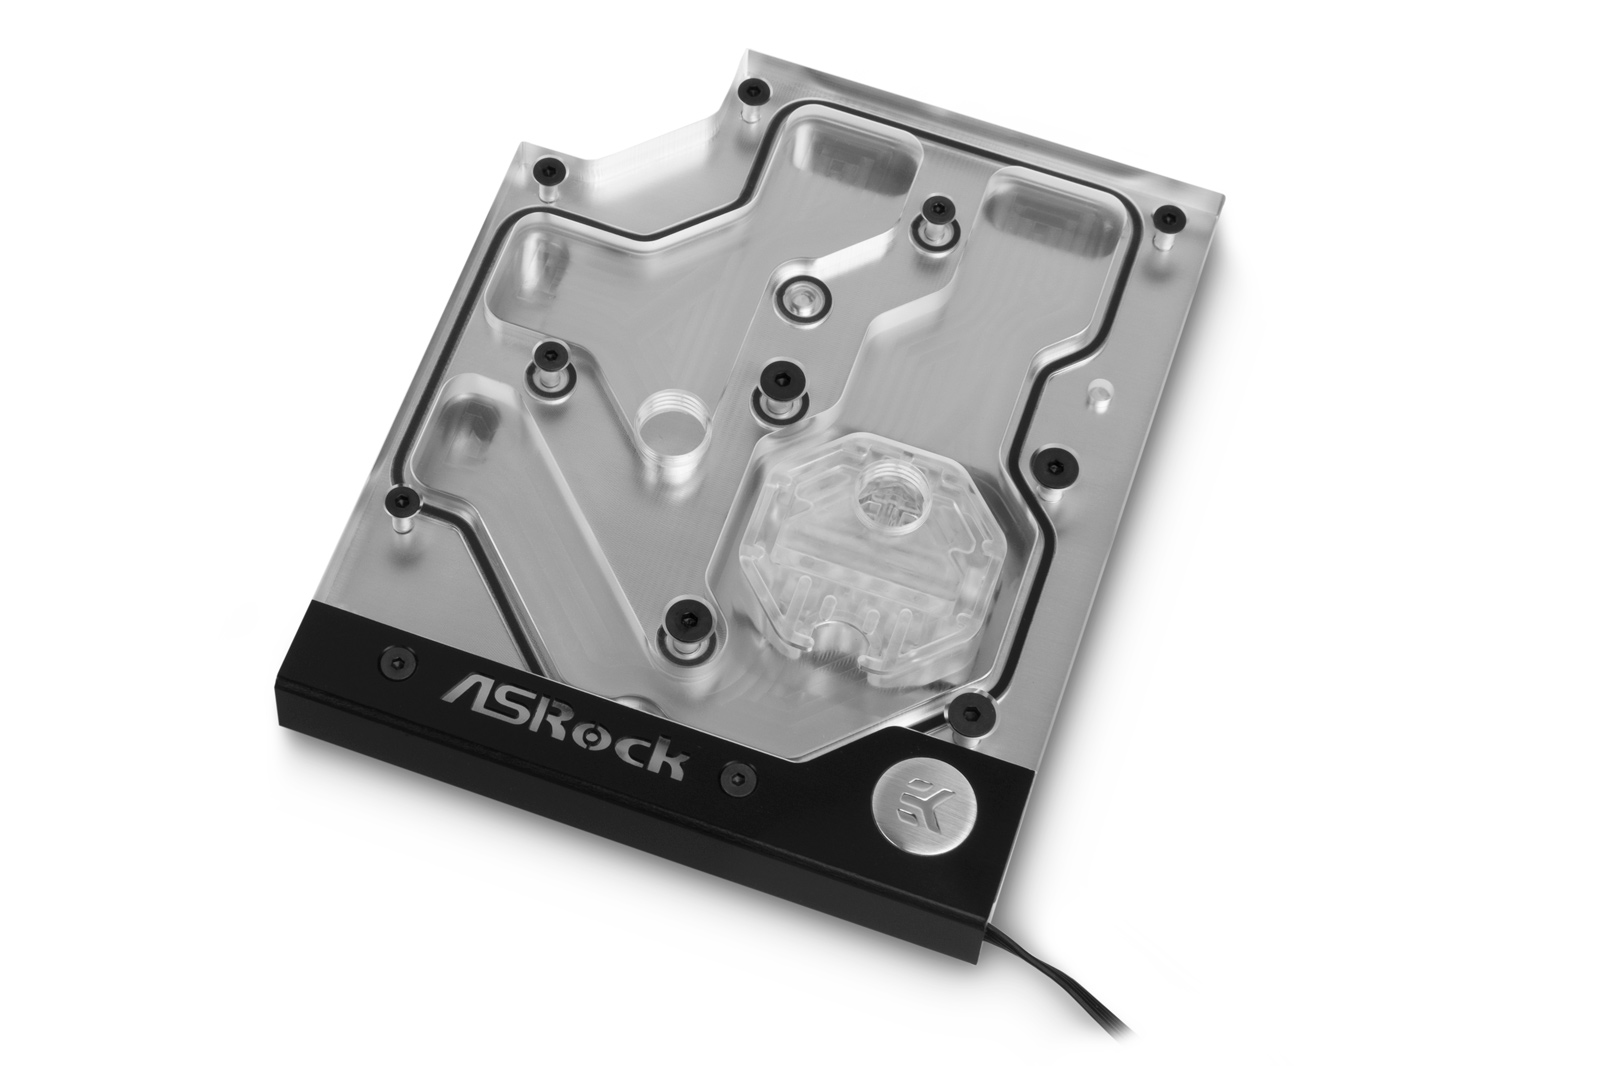 Ek Is Releasing A New Am4 Monoblock For The Asrock Fatal1ty X470 Gaming K4 Motherboards